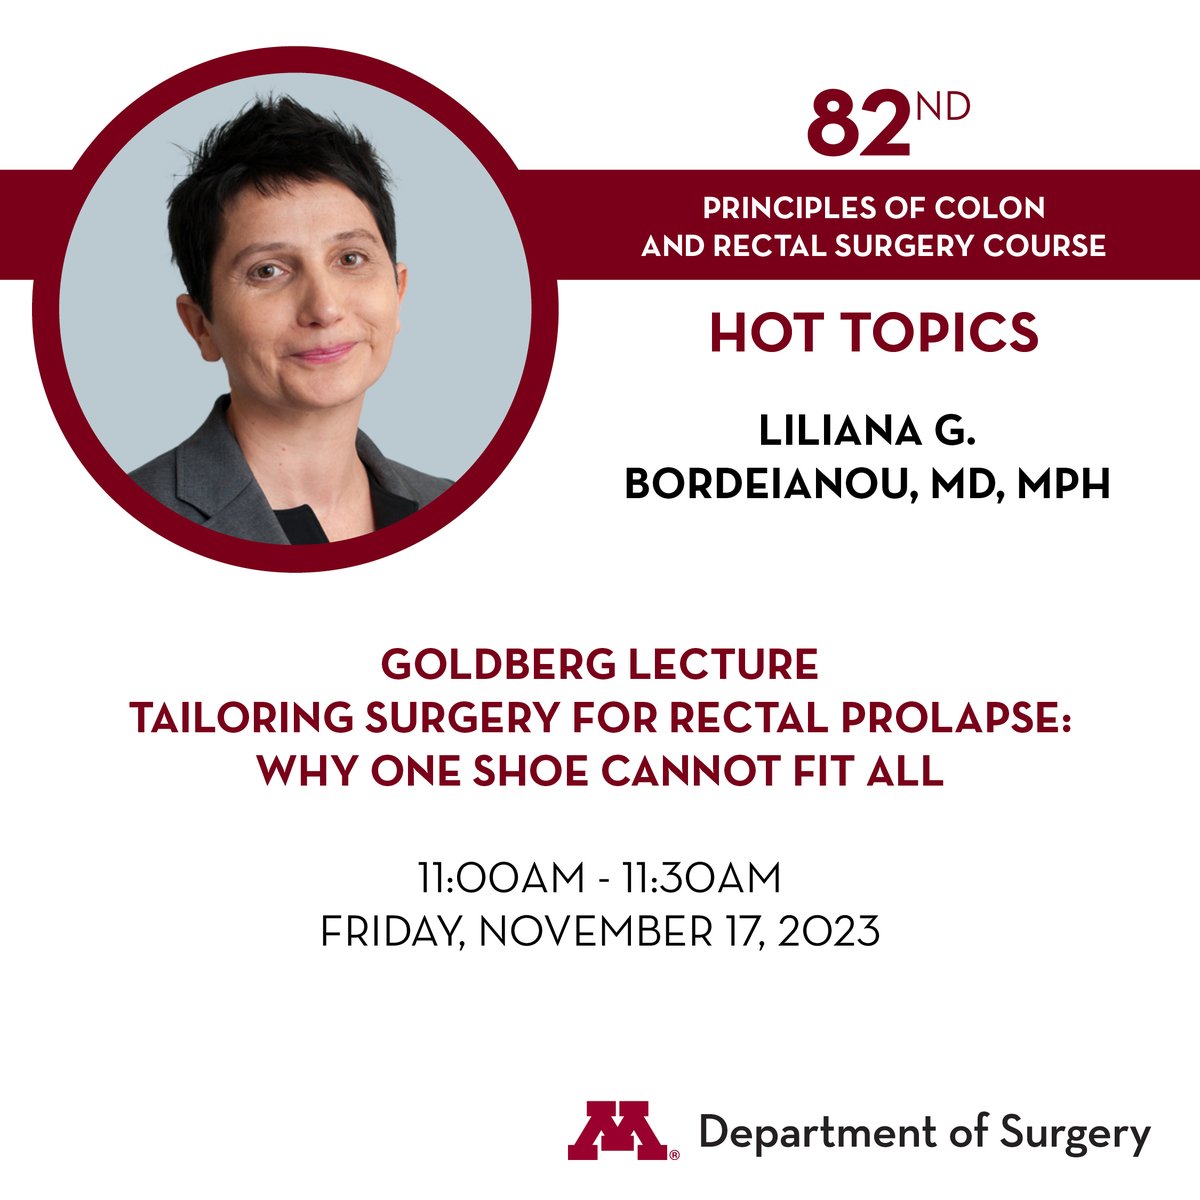 The 82nd Principles of Colon and Rectal Surgery Course is only ten days away! Register today to hear from exceptional speakers, including this year's Goldberg and Frykman Lecturers. Learn more & register ⬇️ z.umn.edu/colonandrectal